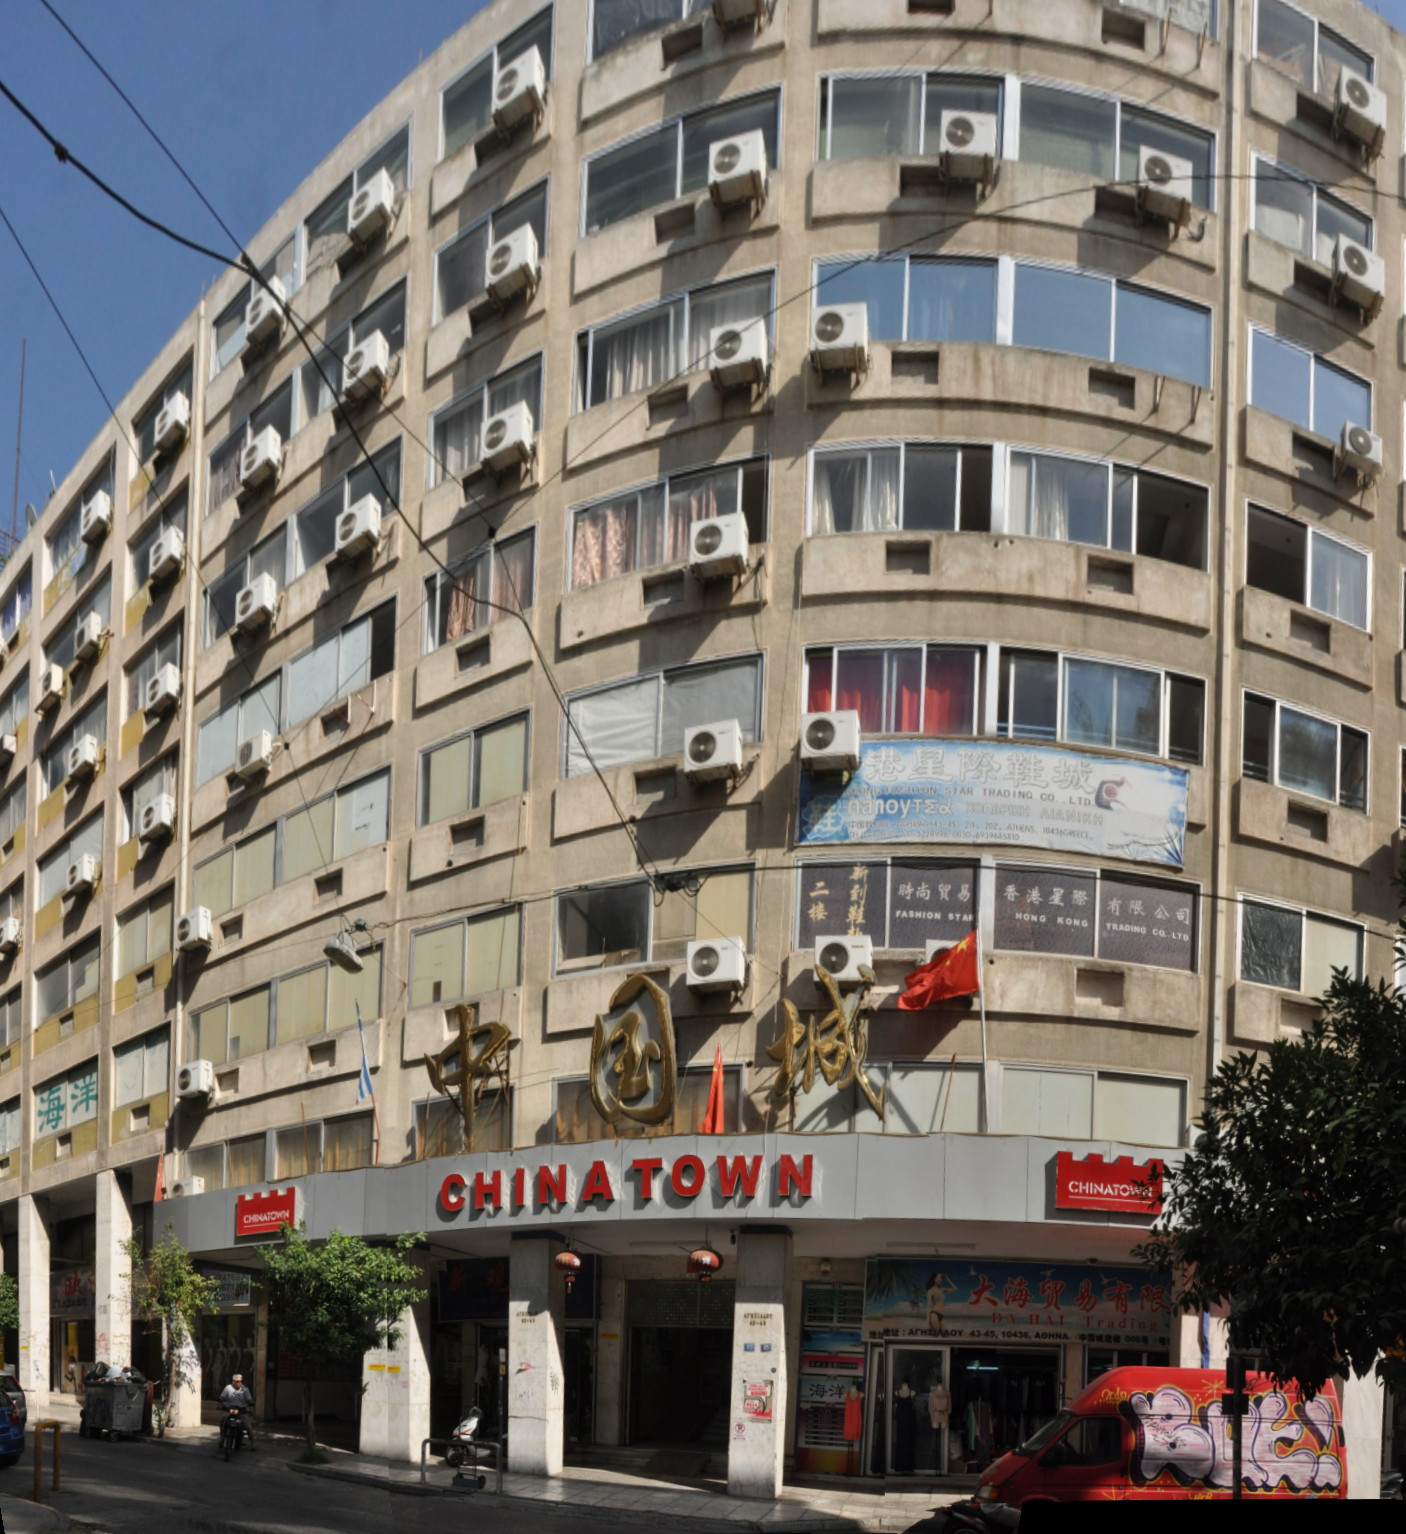 20140624_athens_chinatown_building